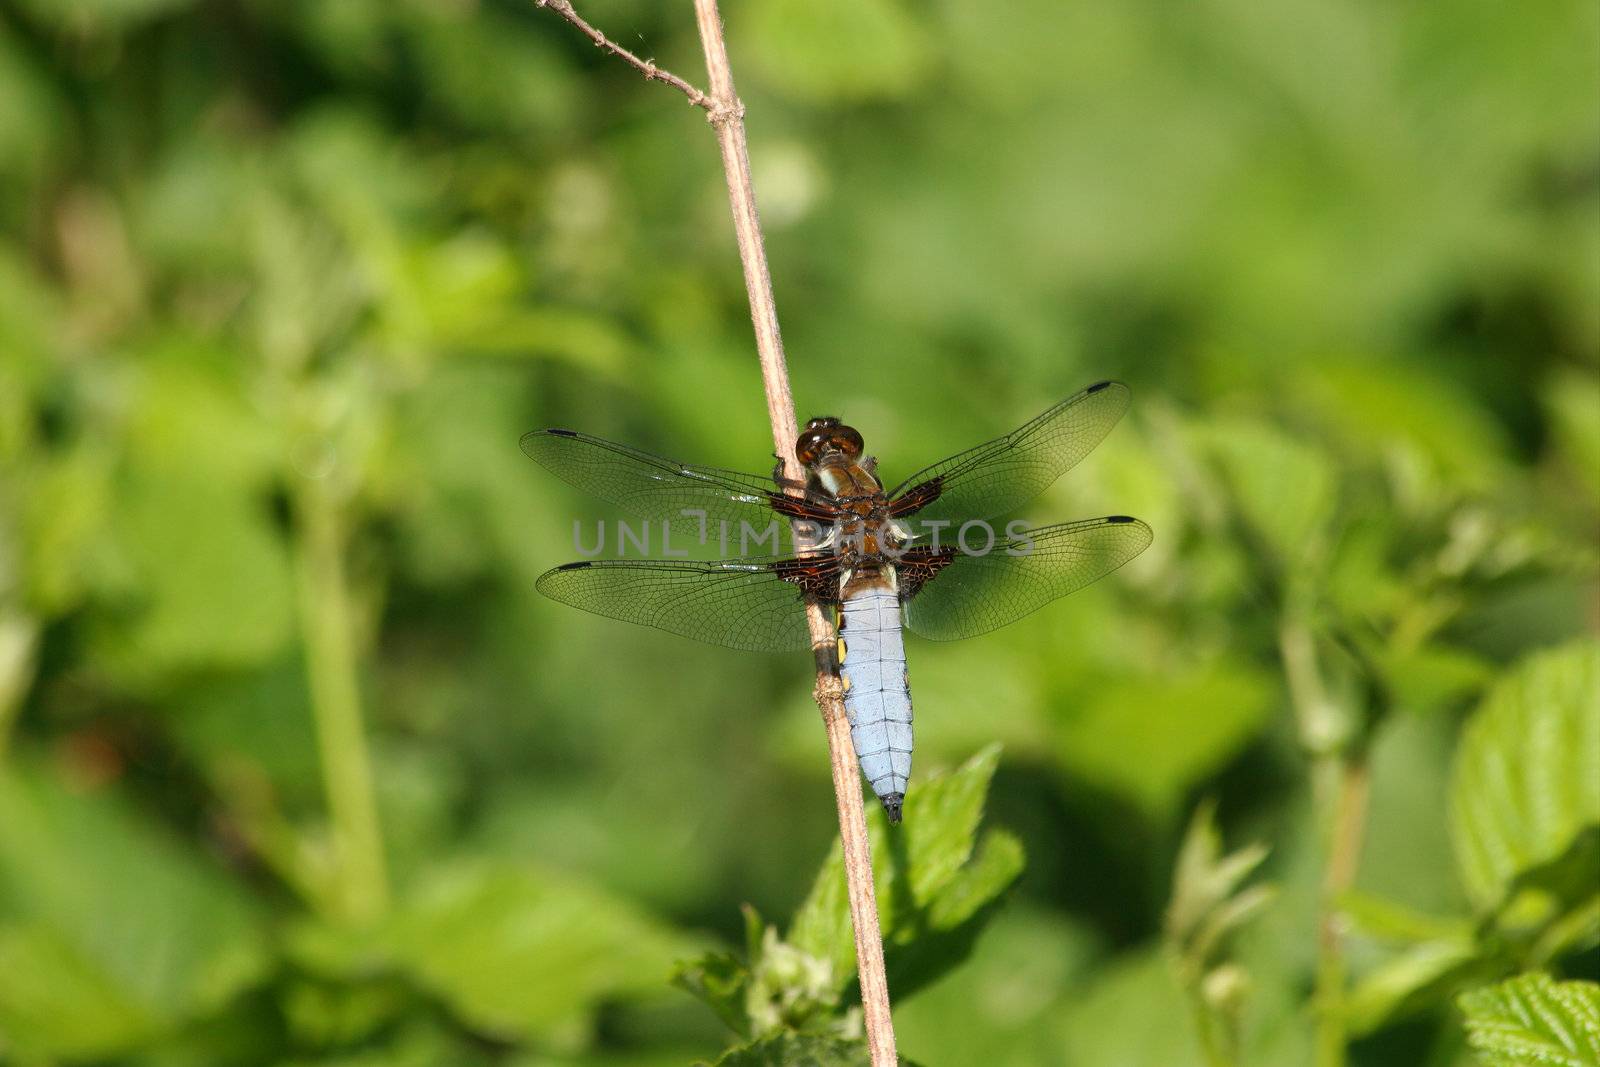 Broad-bodied Chaser (Libellula depressa) - male on a branch